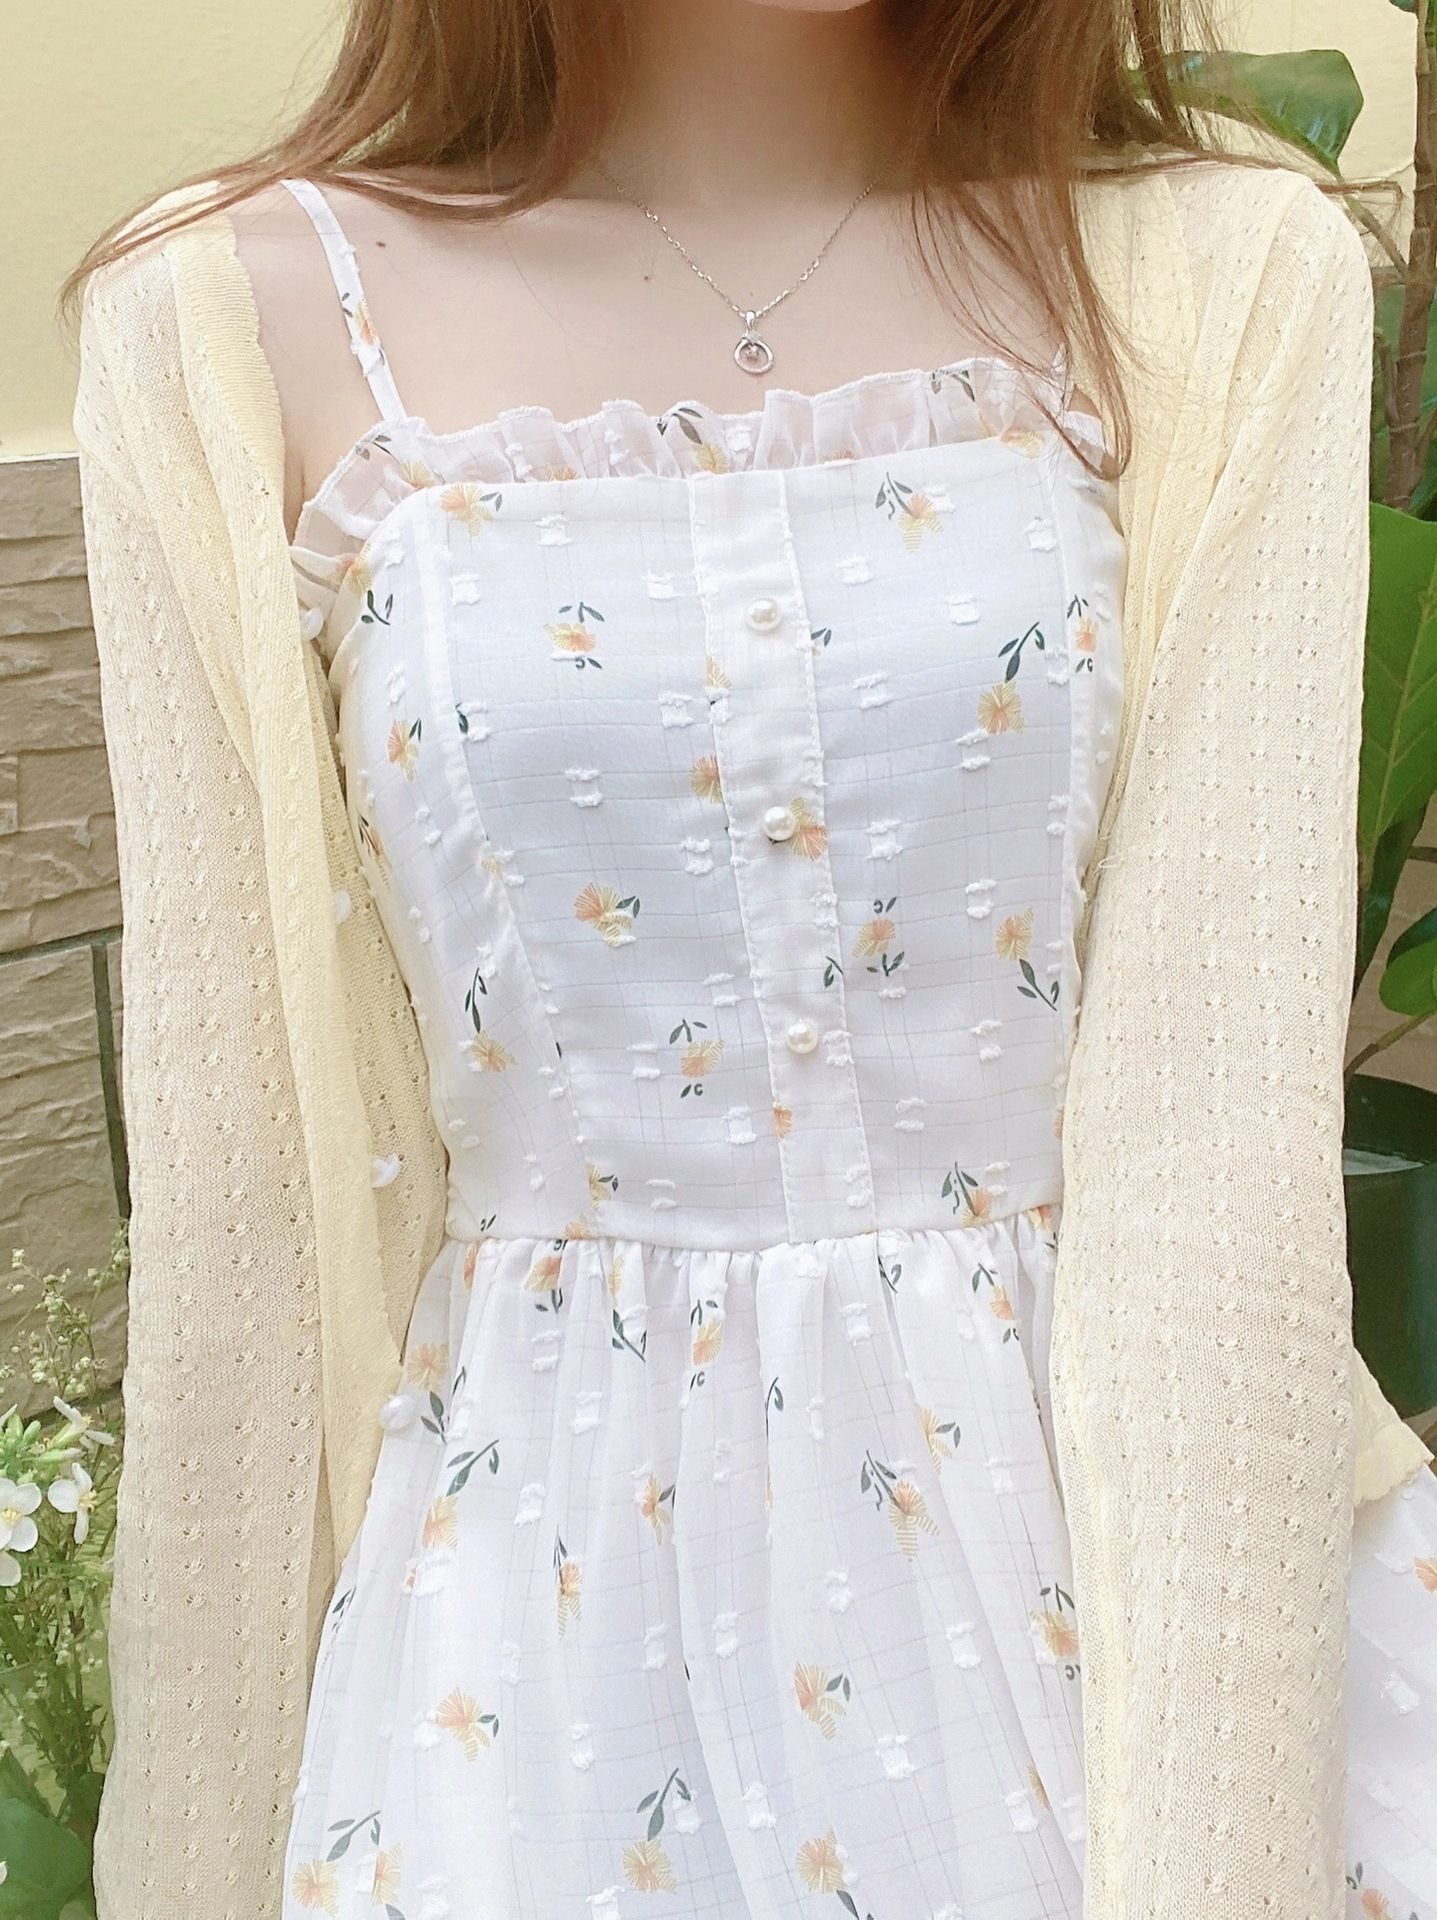 Sweet Floral Suspender Dress Summer Mori Style Waist-Controlled White Long Dress First Love Niche Fairy All-Matching Women's Clothing